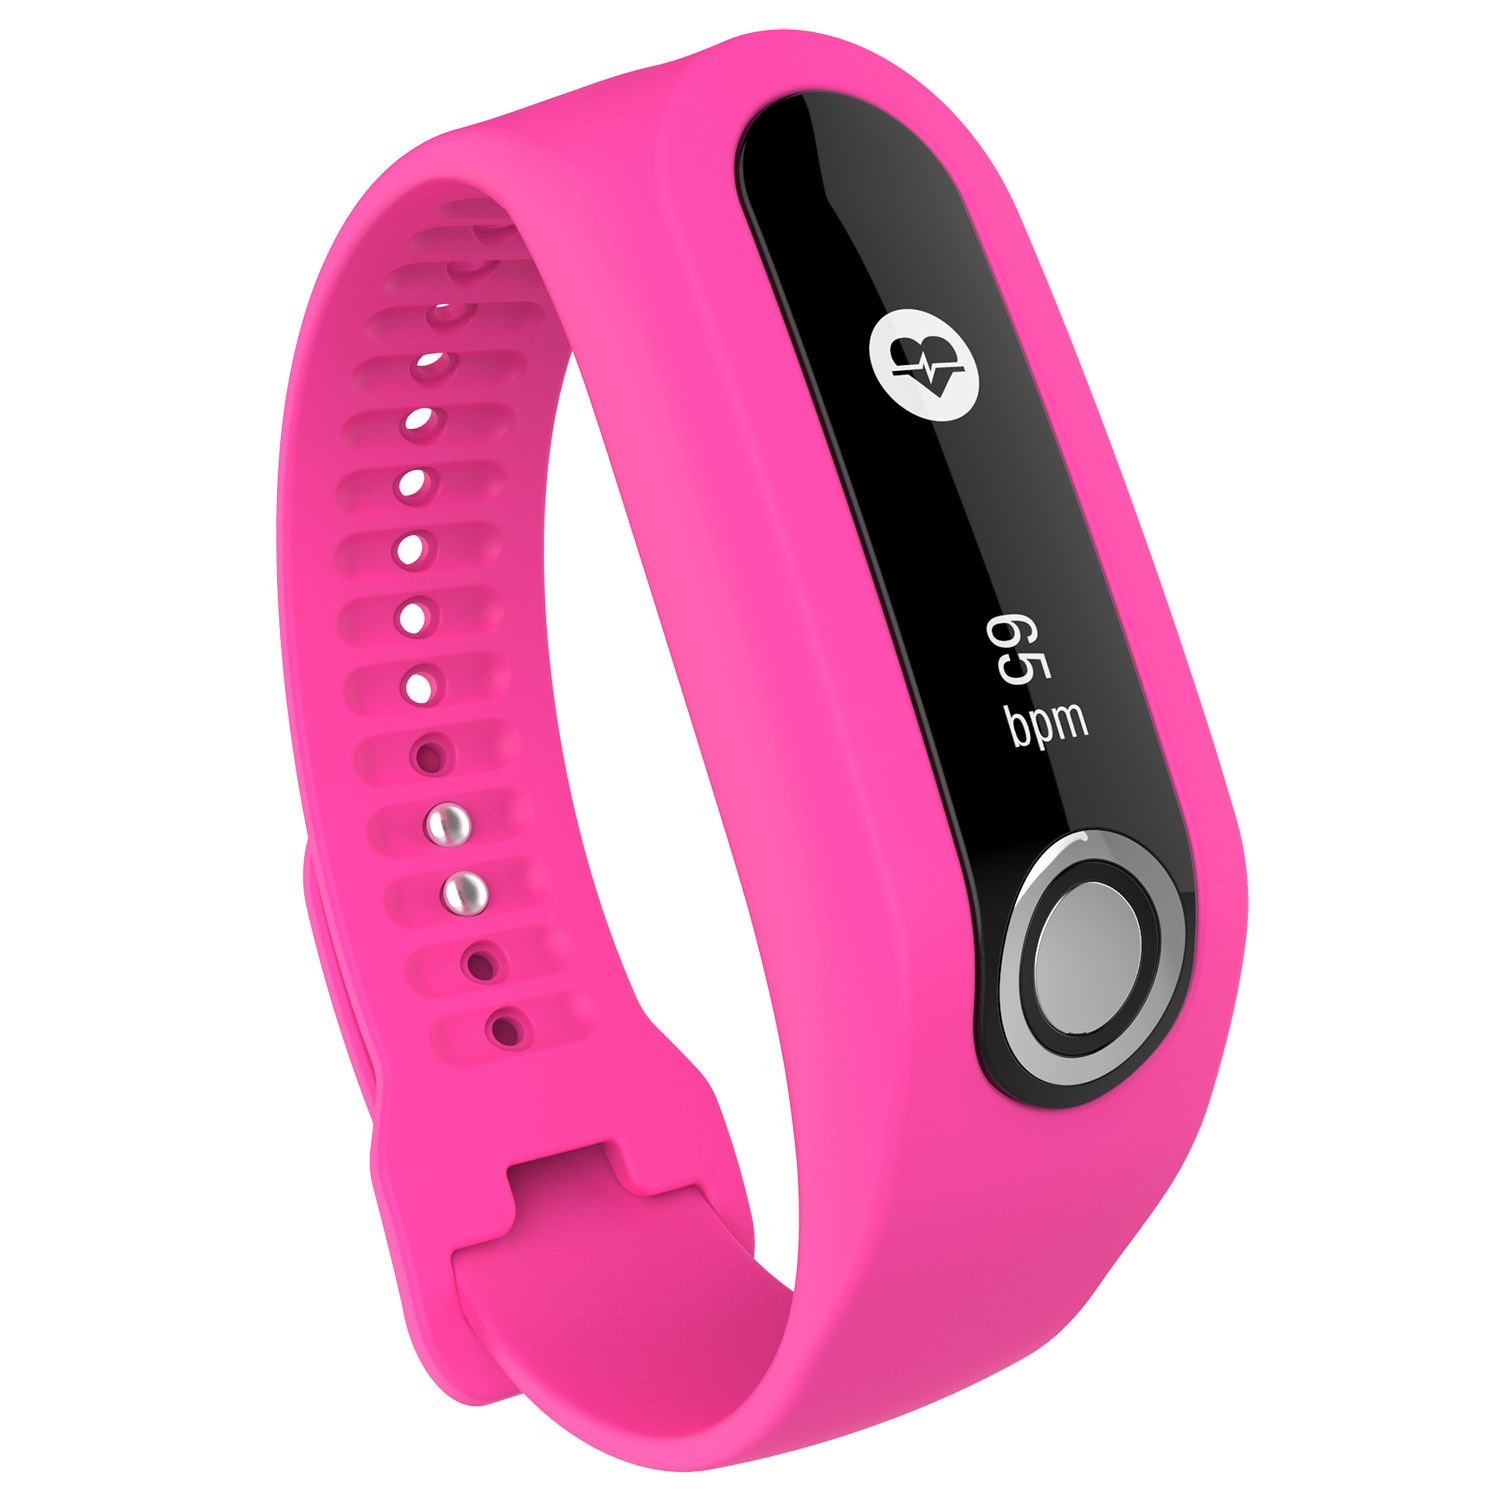 Tomtom Touch Sport Strap - Pink